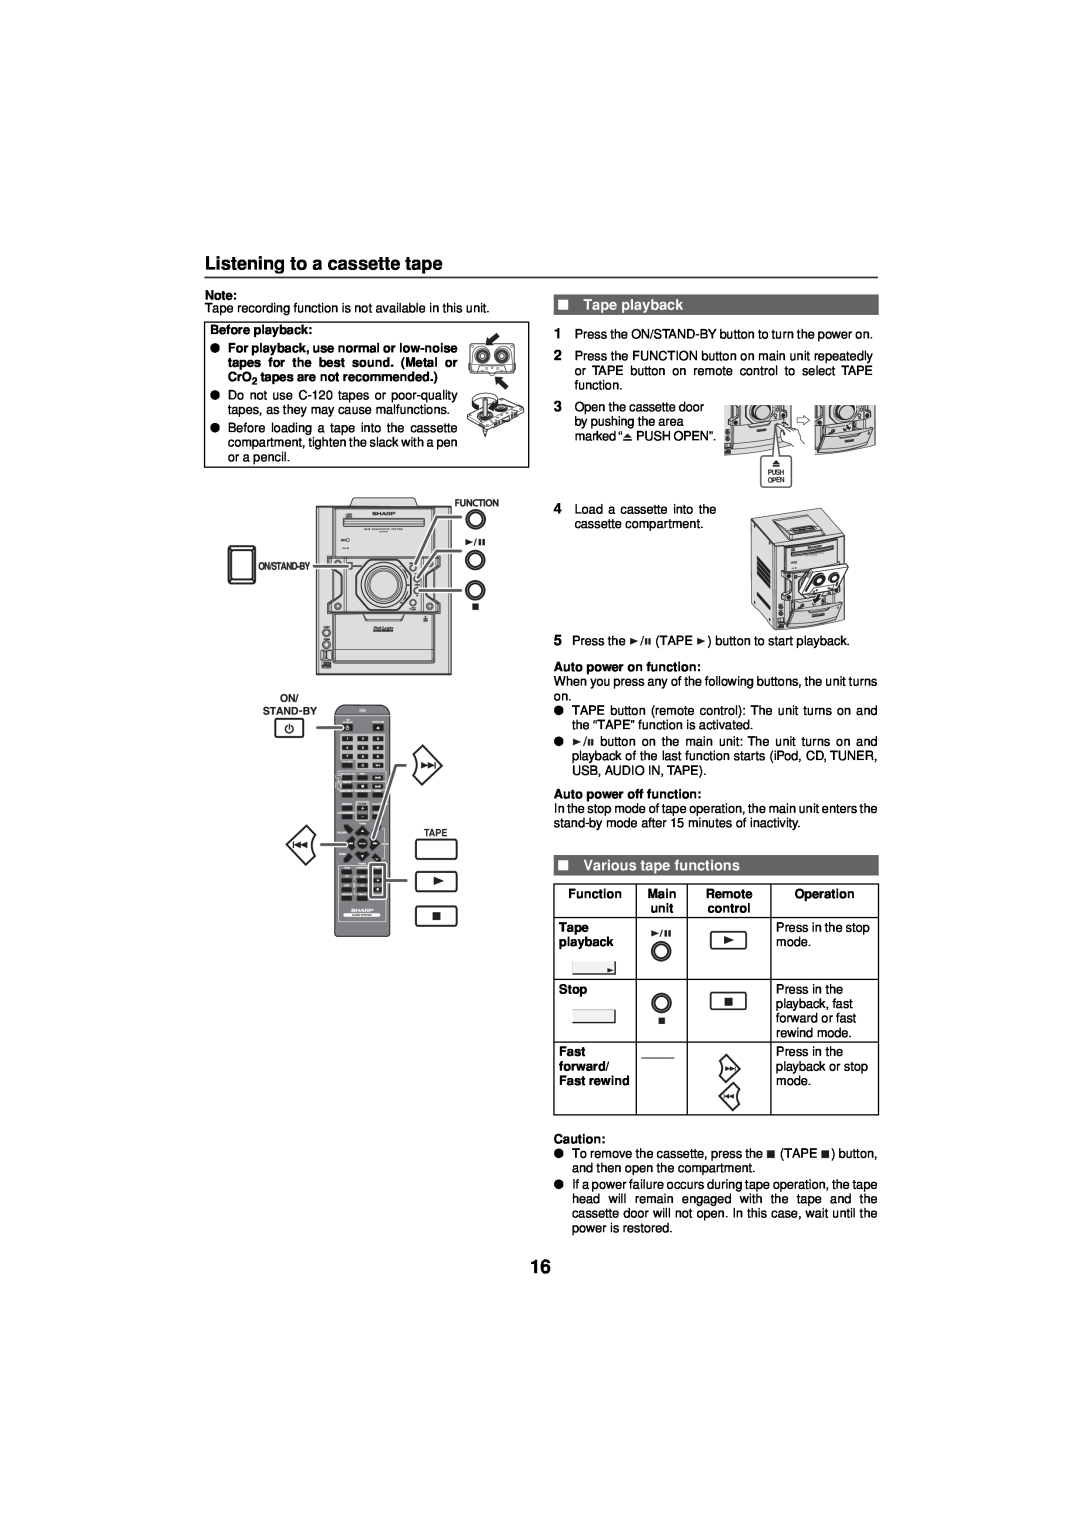 Sharp CD-DH790NH operation manual Listening to a cassette tape, Tape playback, Various tape functions 